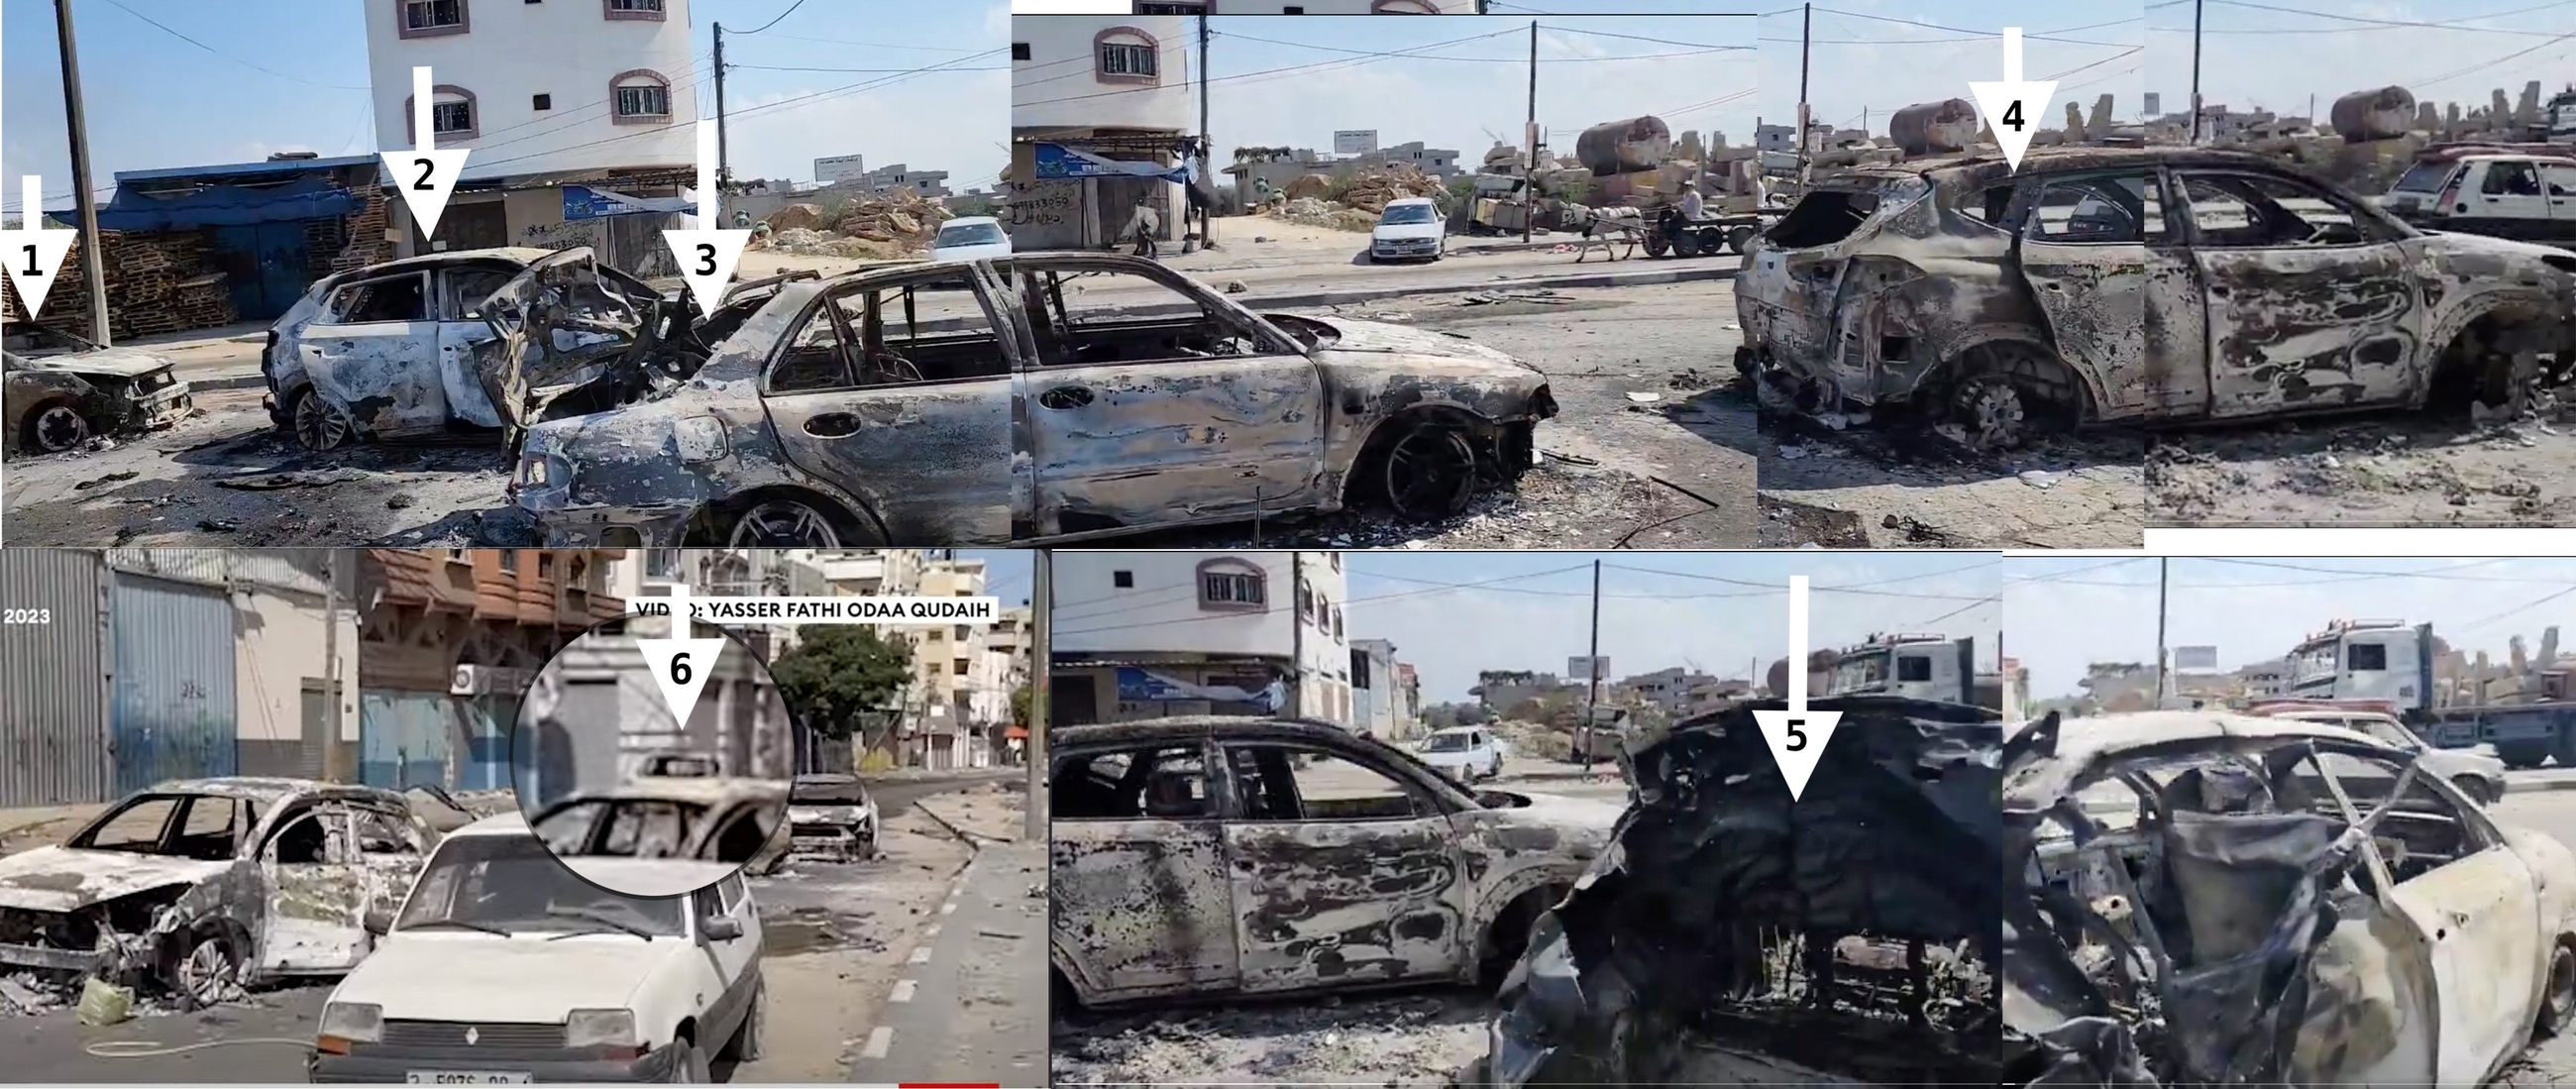 Screenshots from a Forbes Breaking News video, and from a video by journalist Al-Zanoon, show the various bombed and burned cars along the street.